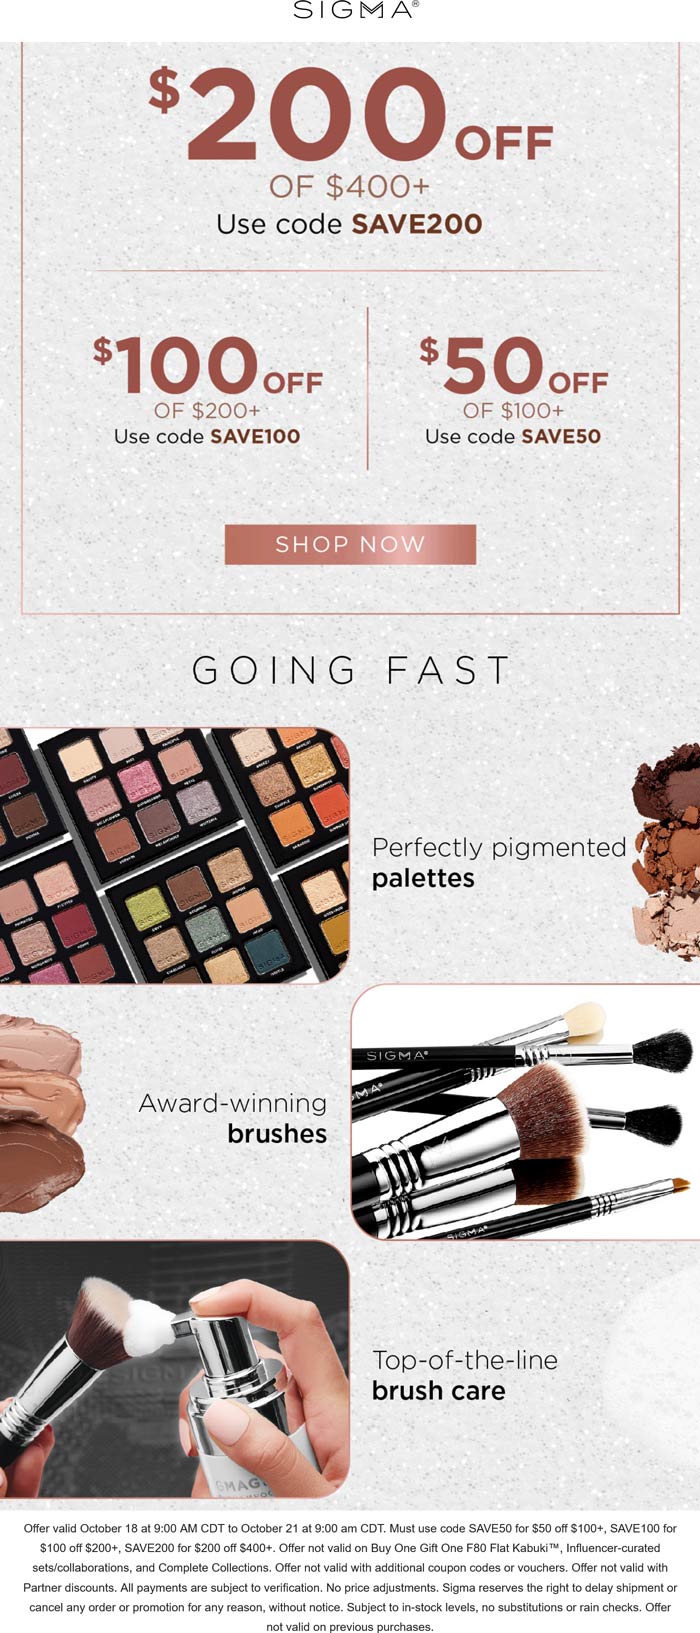 Sigma stores Coupon  $50 off $100 & more today at Sigma beauty via promo code SAVE50 #sigma 